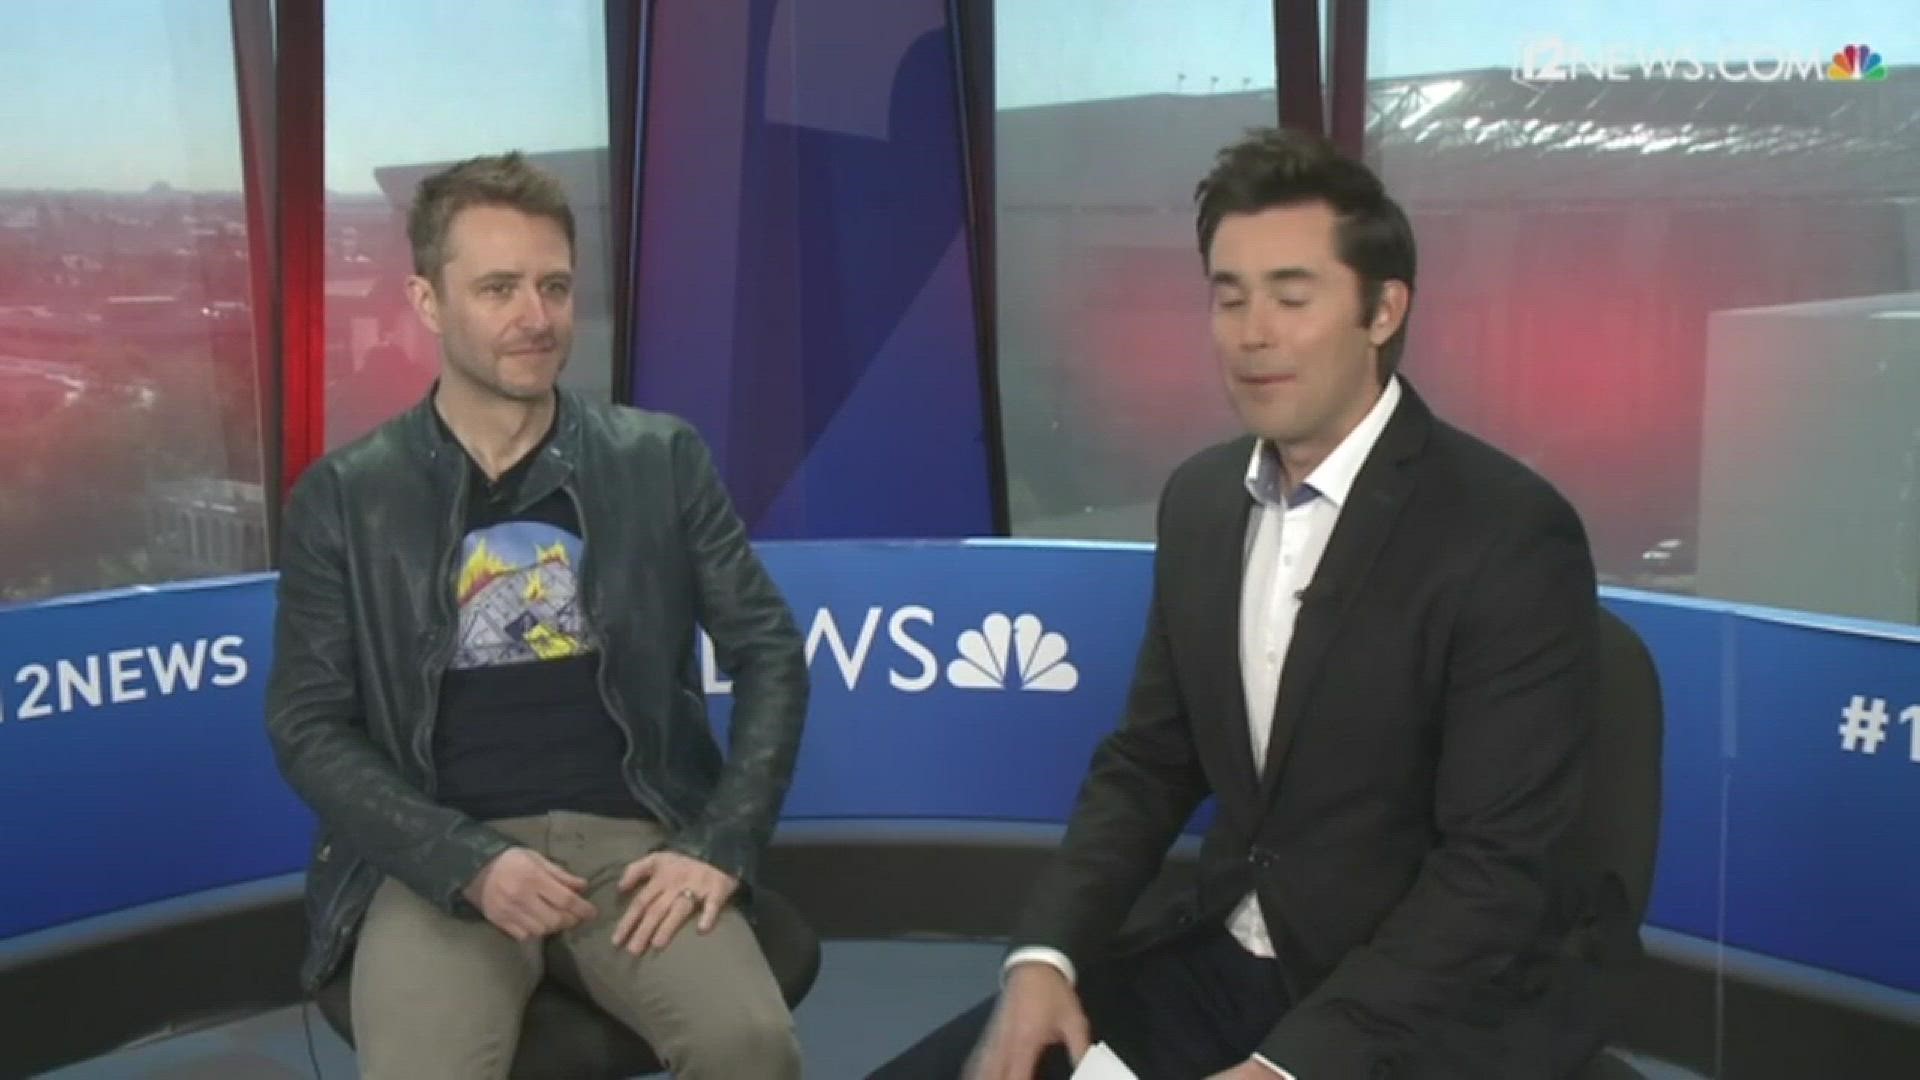 Chris Hardwick talks about visiting Tucson, hosting a new TV show, and much more.